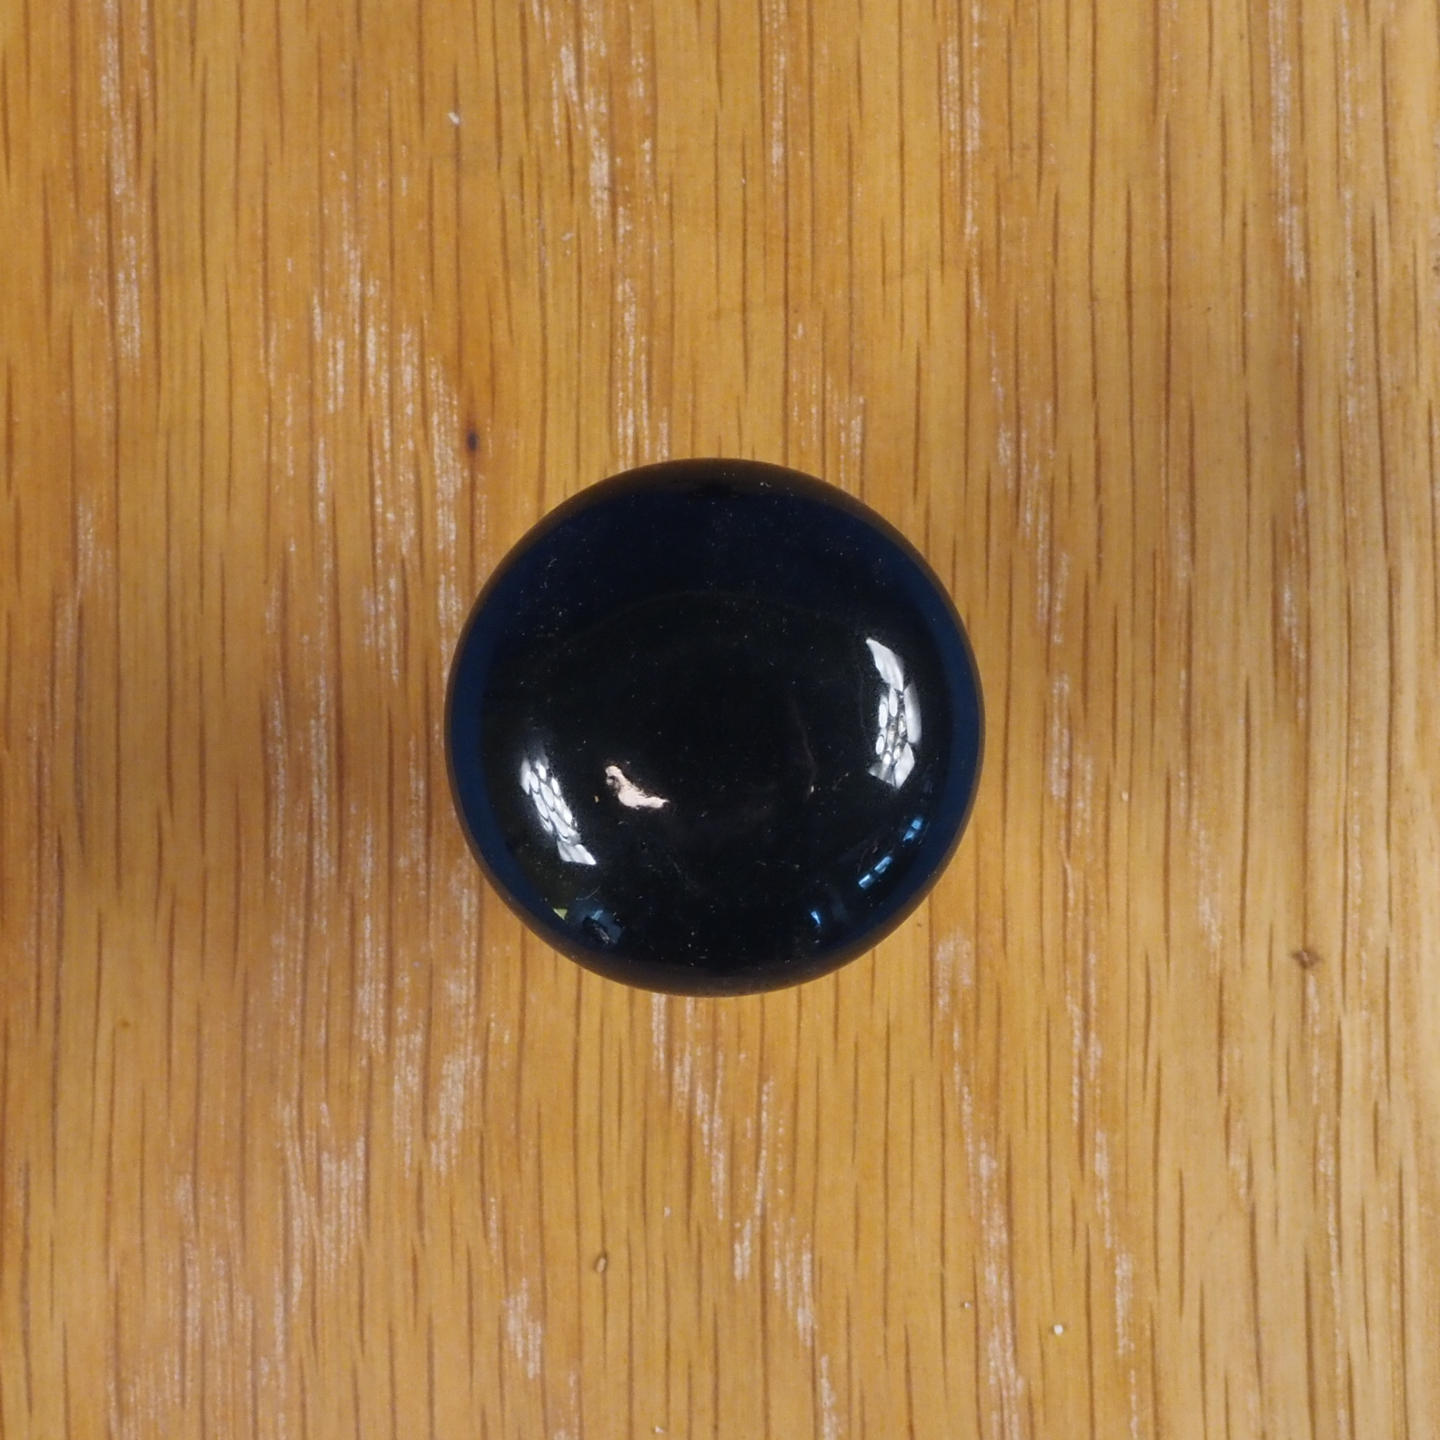 Cabinet knob in black porcelain and brass